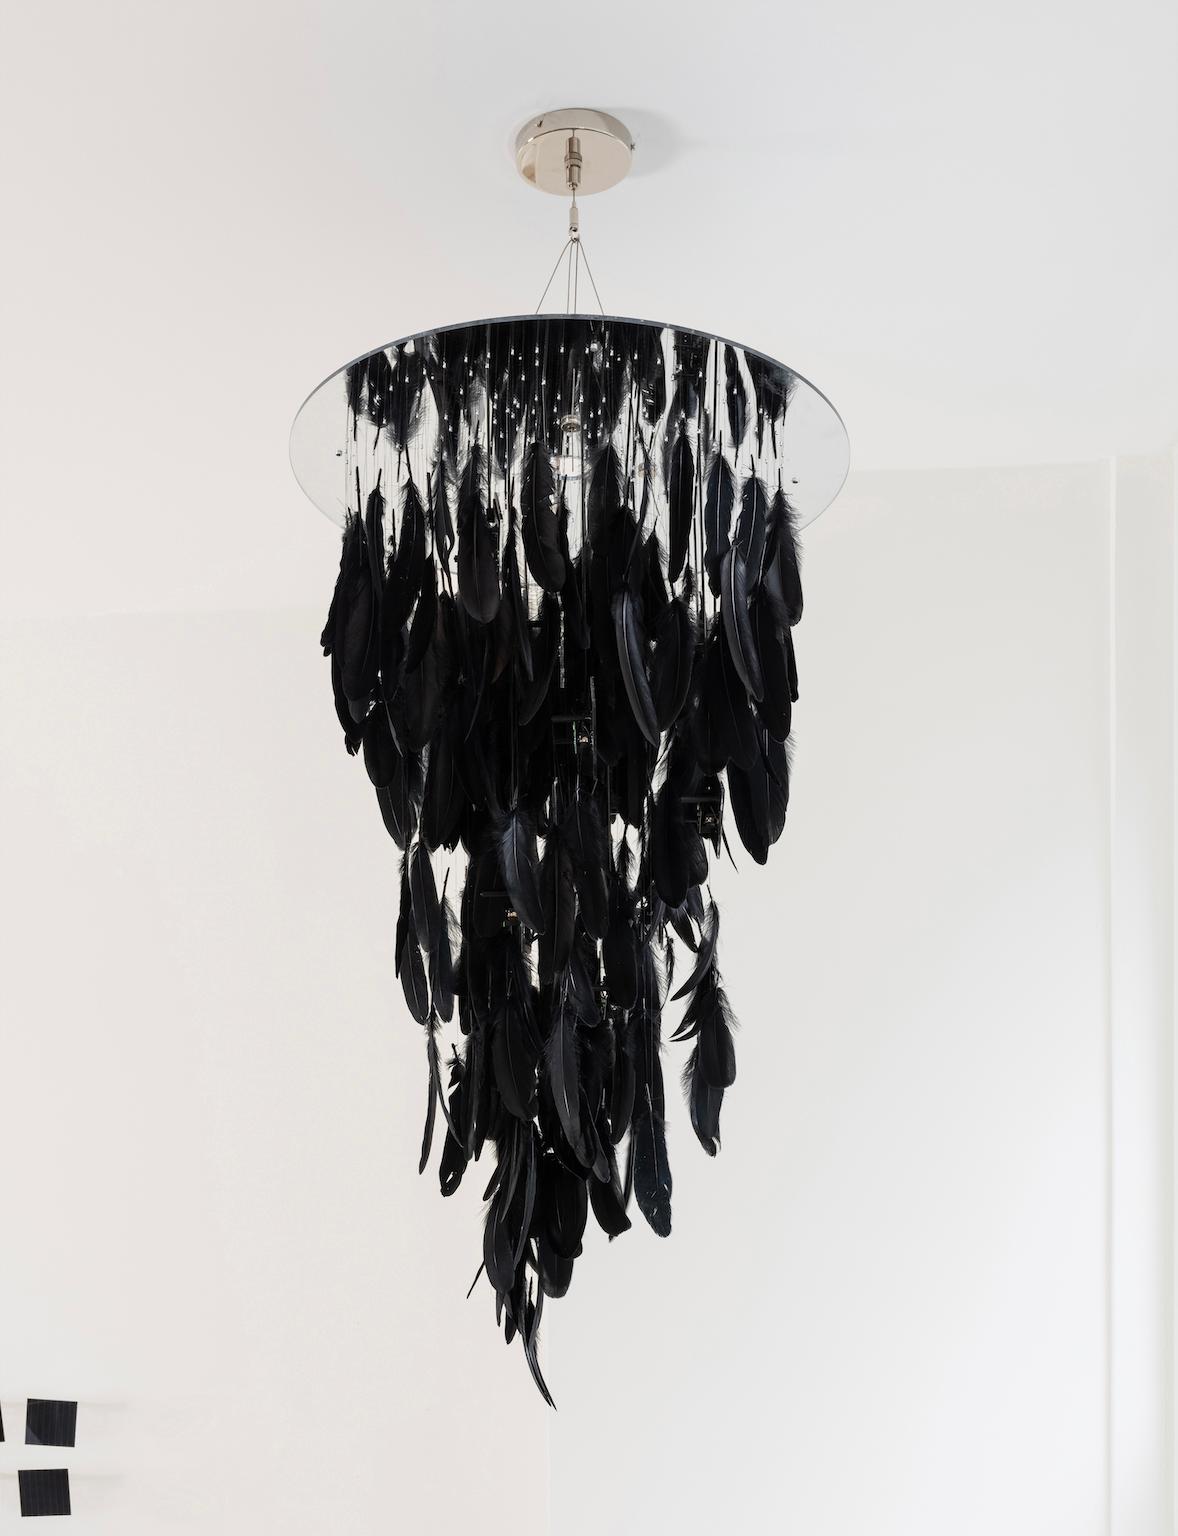 Plume Solar chandelier, a customizable solar-powered lighting installation for the off-the-grid living room, comprises photovoltaic modules that power LED bulbs to illuminate feathers to provide ambient lighting. The piece aims to demystify PV